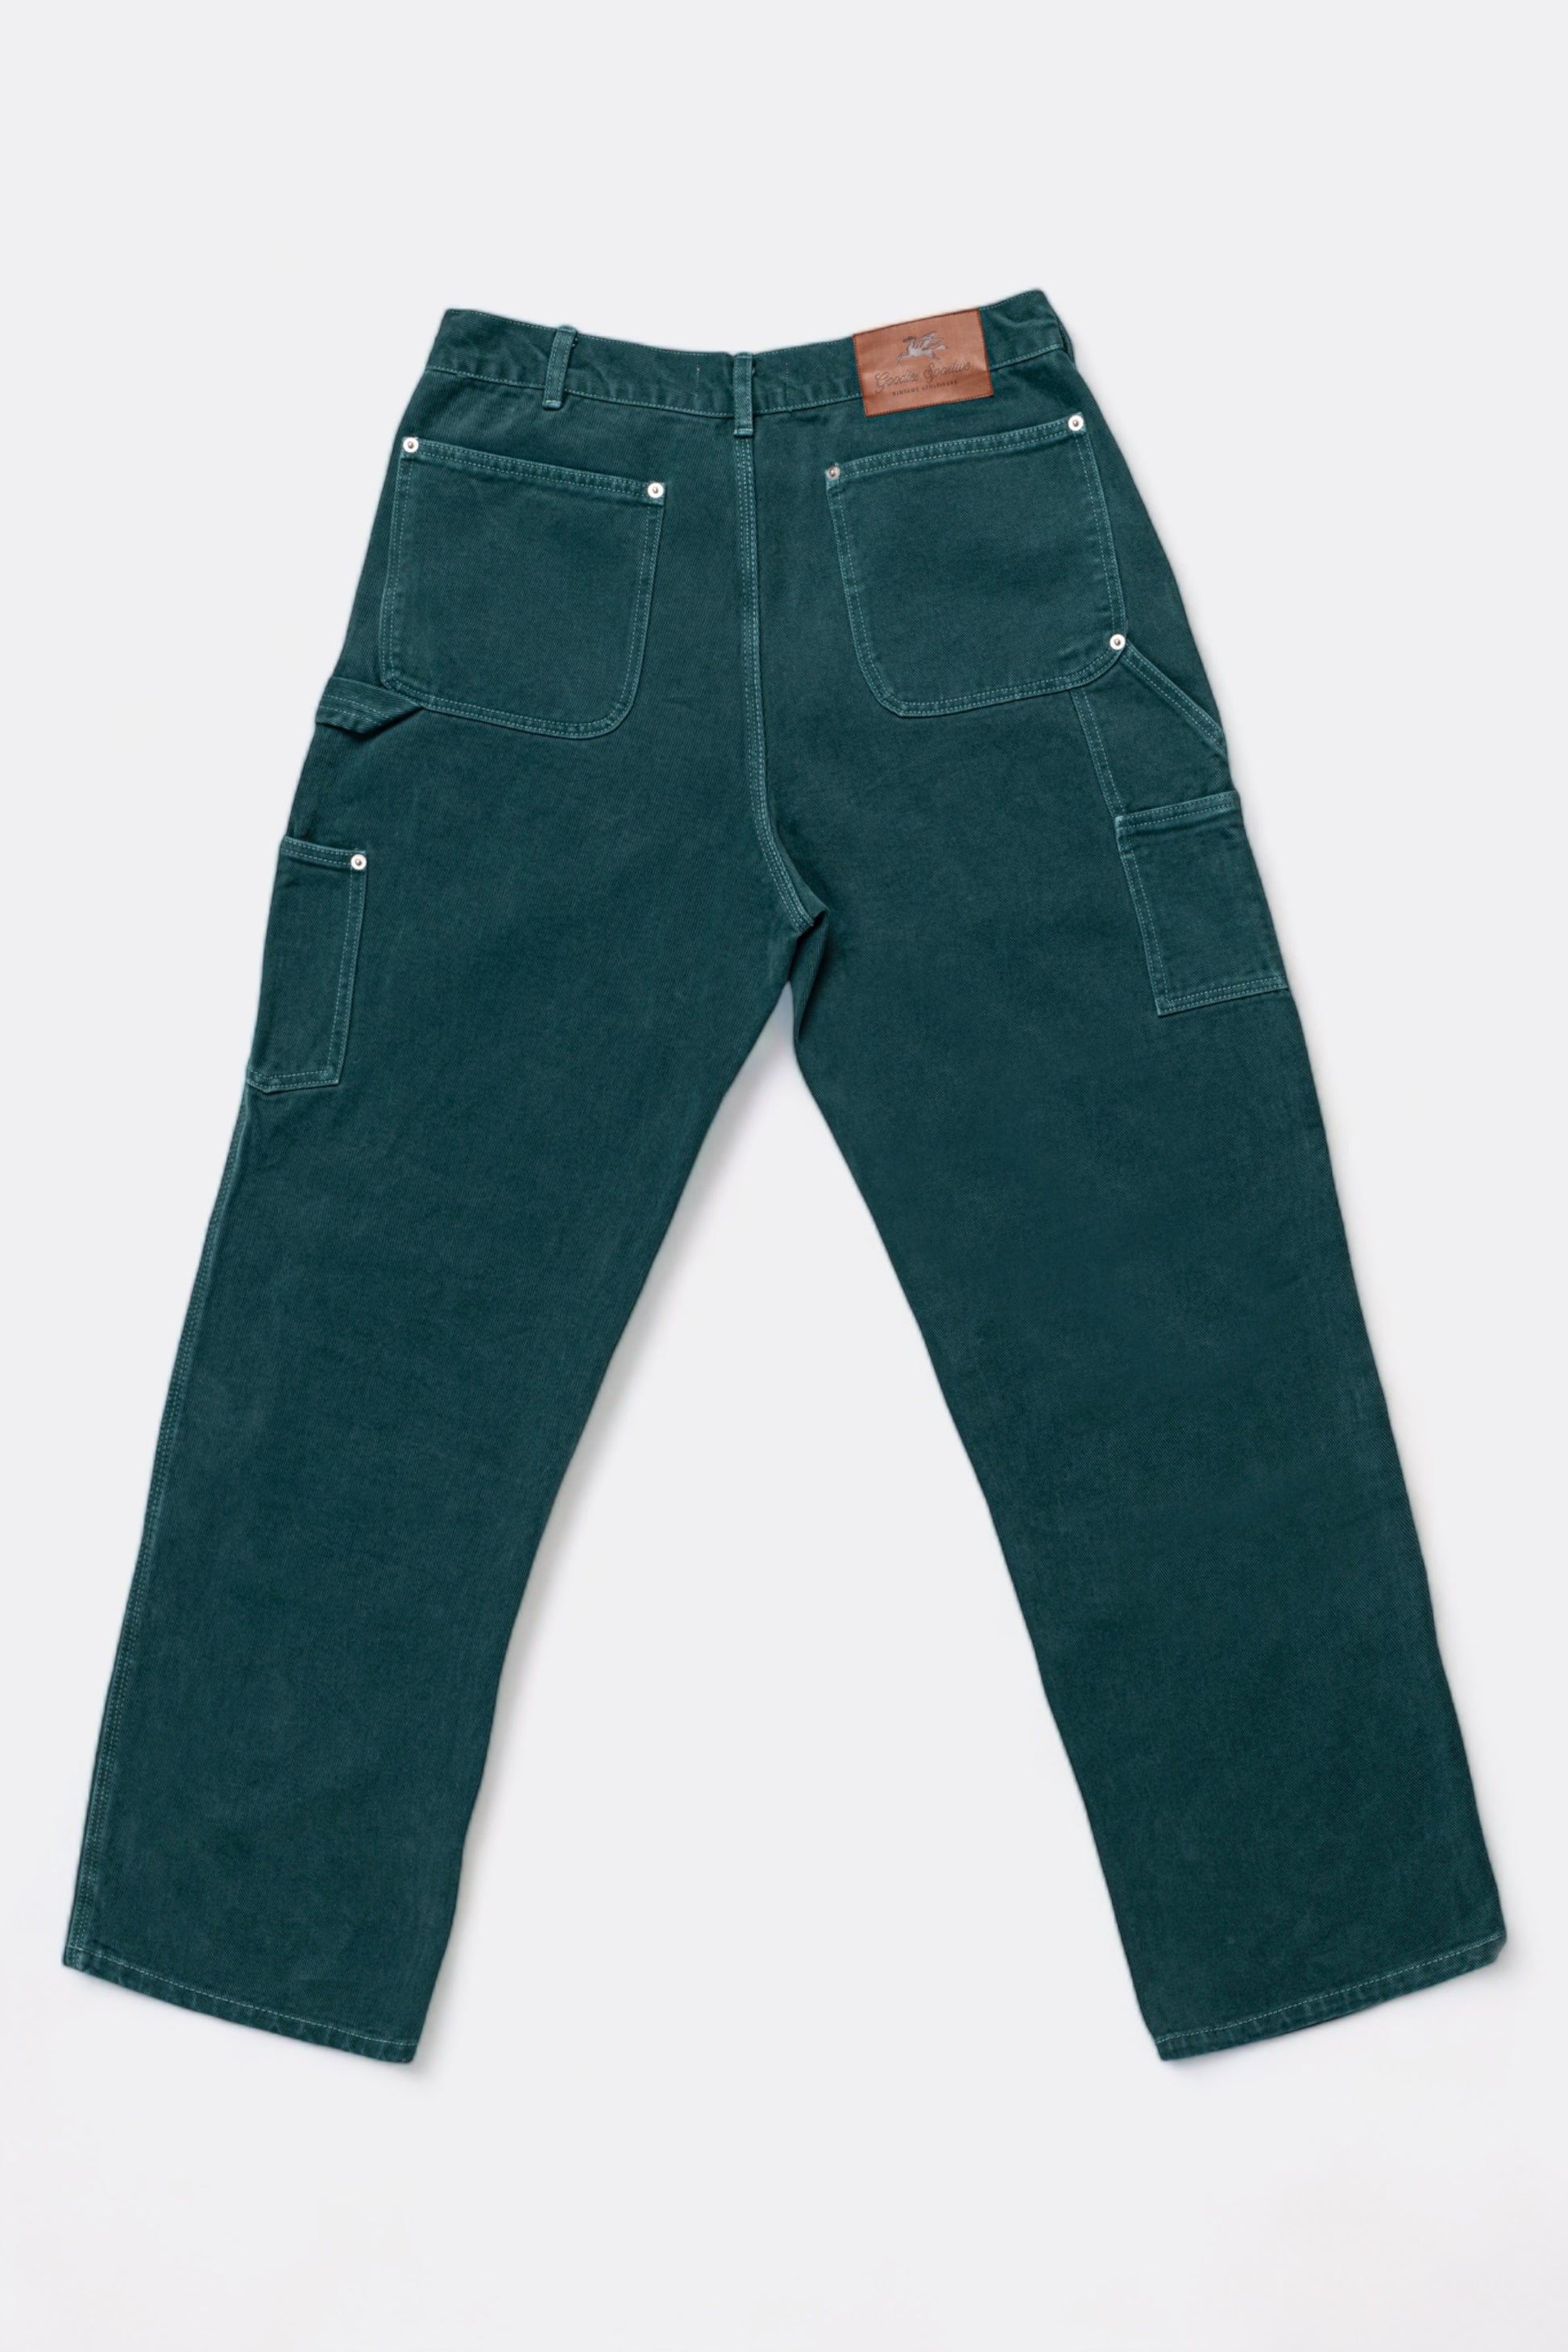 Goodies Sportive - Carpenter Washed Pant (Green)